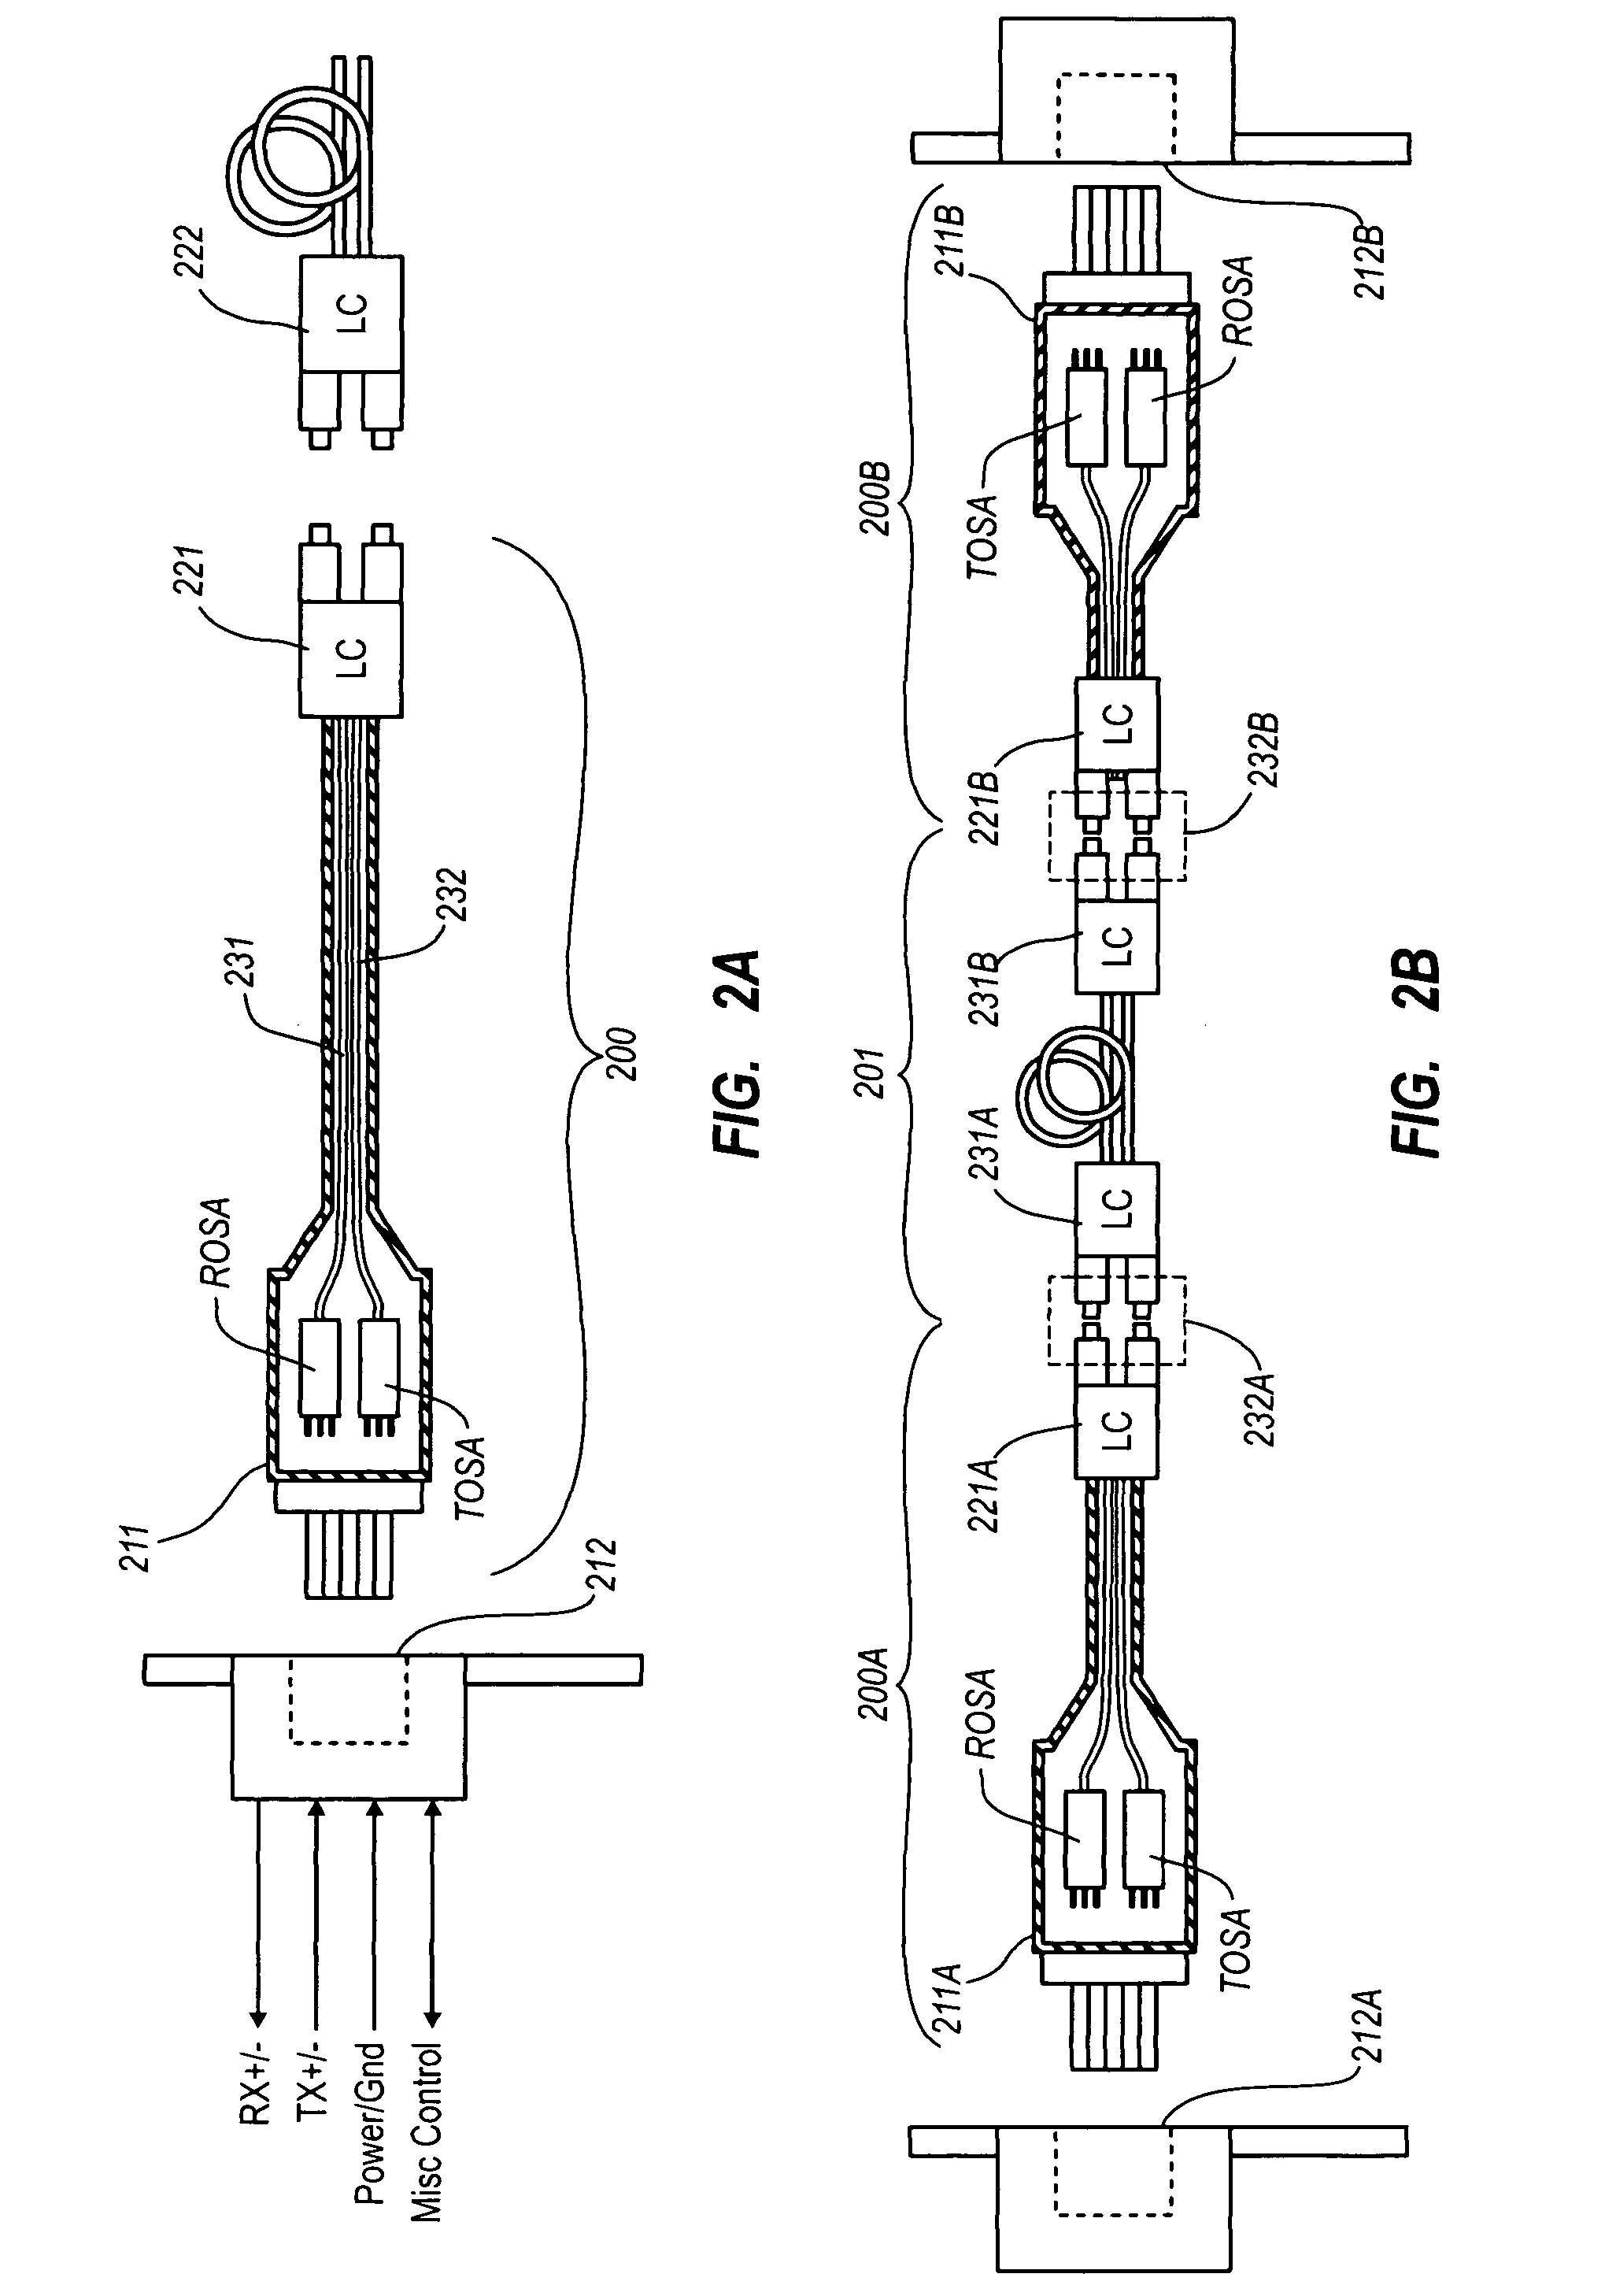 Active optical cable with integrated power